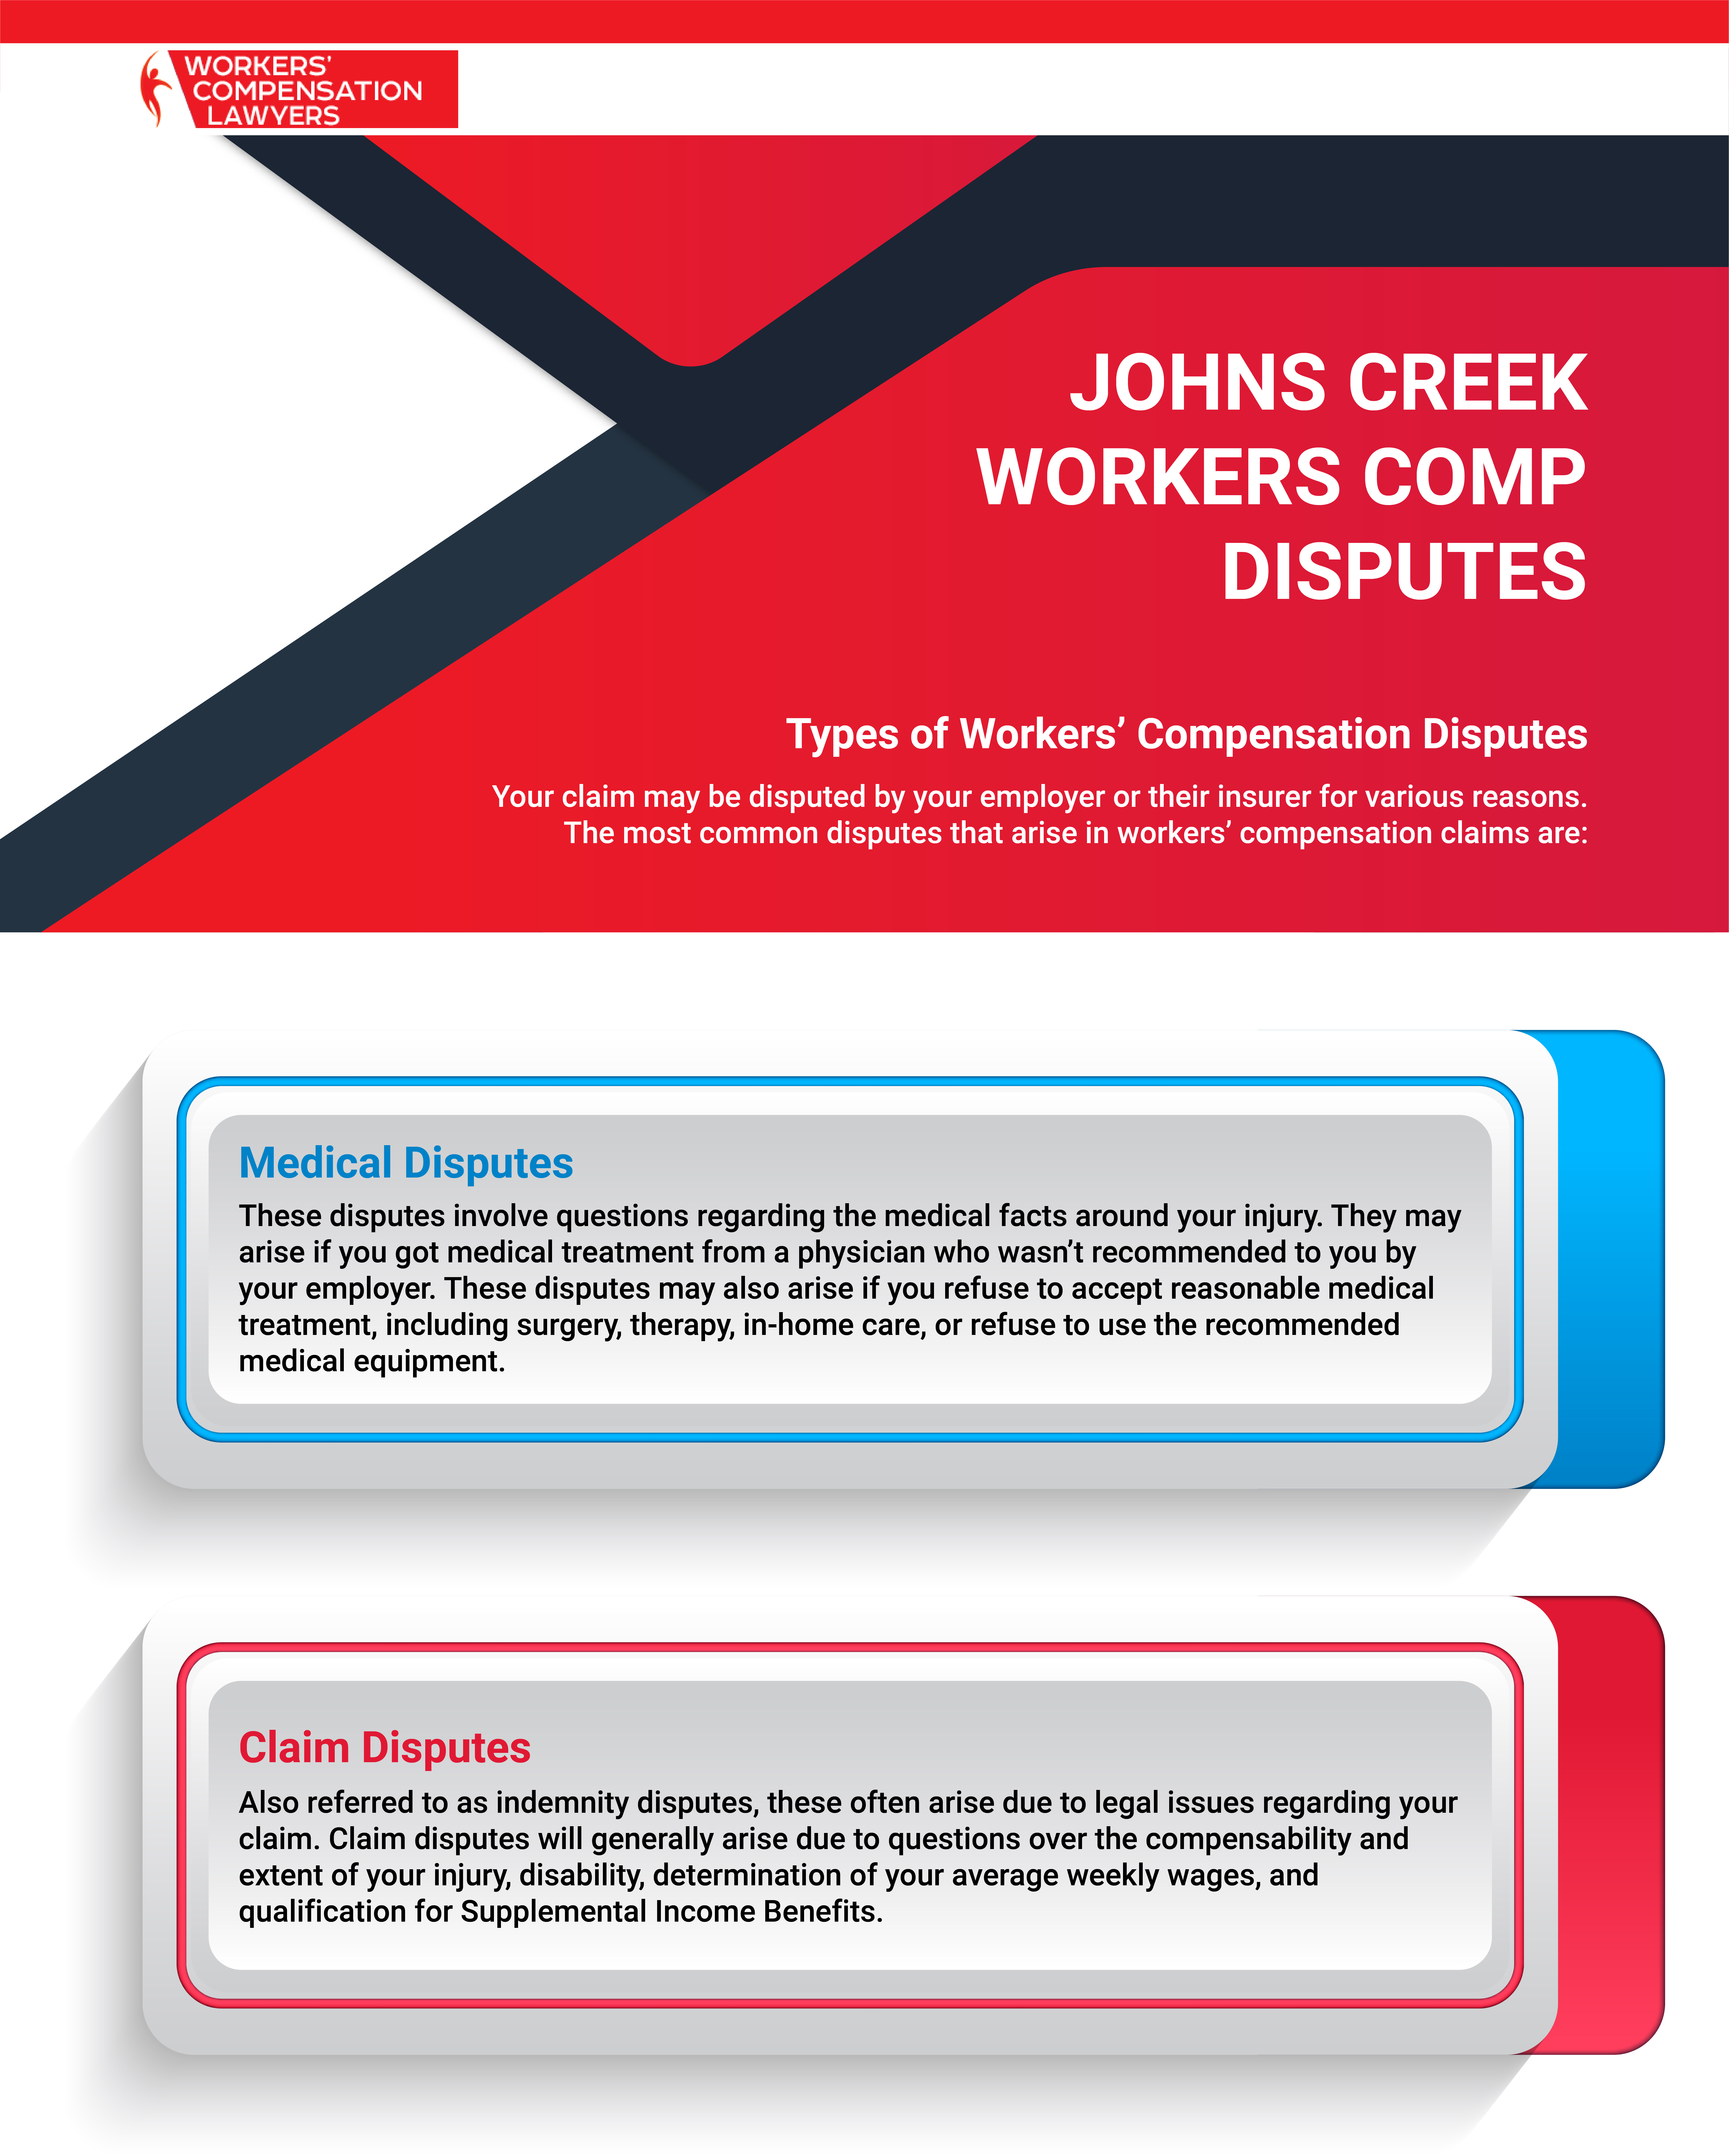 Johns Creek Workers Compensation Disputes Infographic